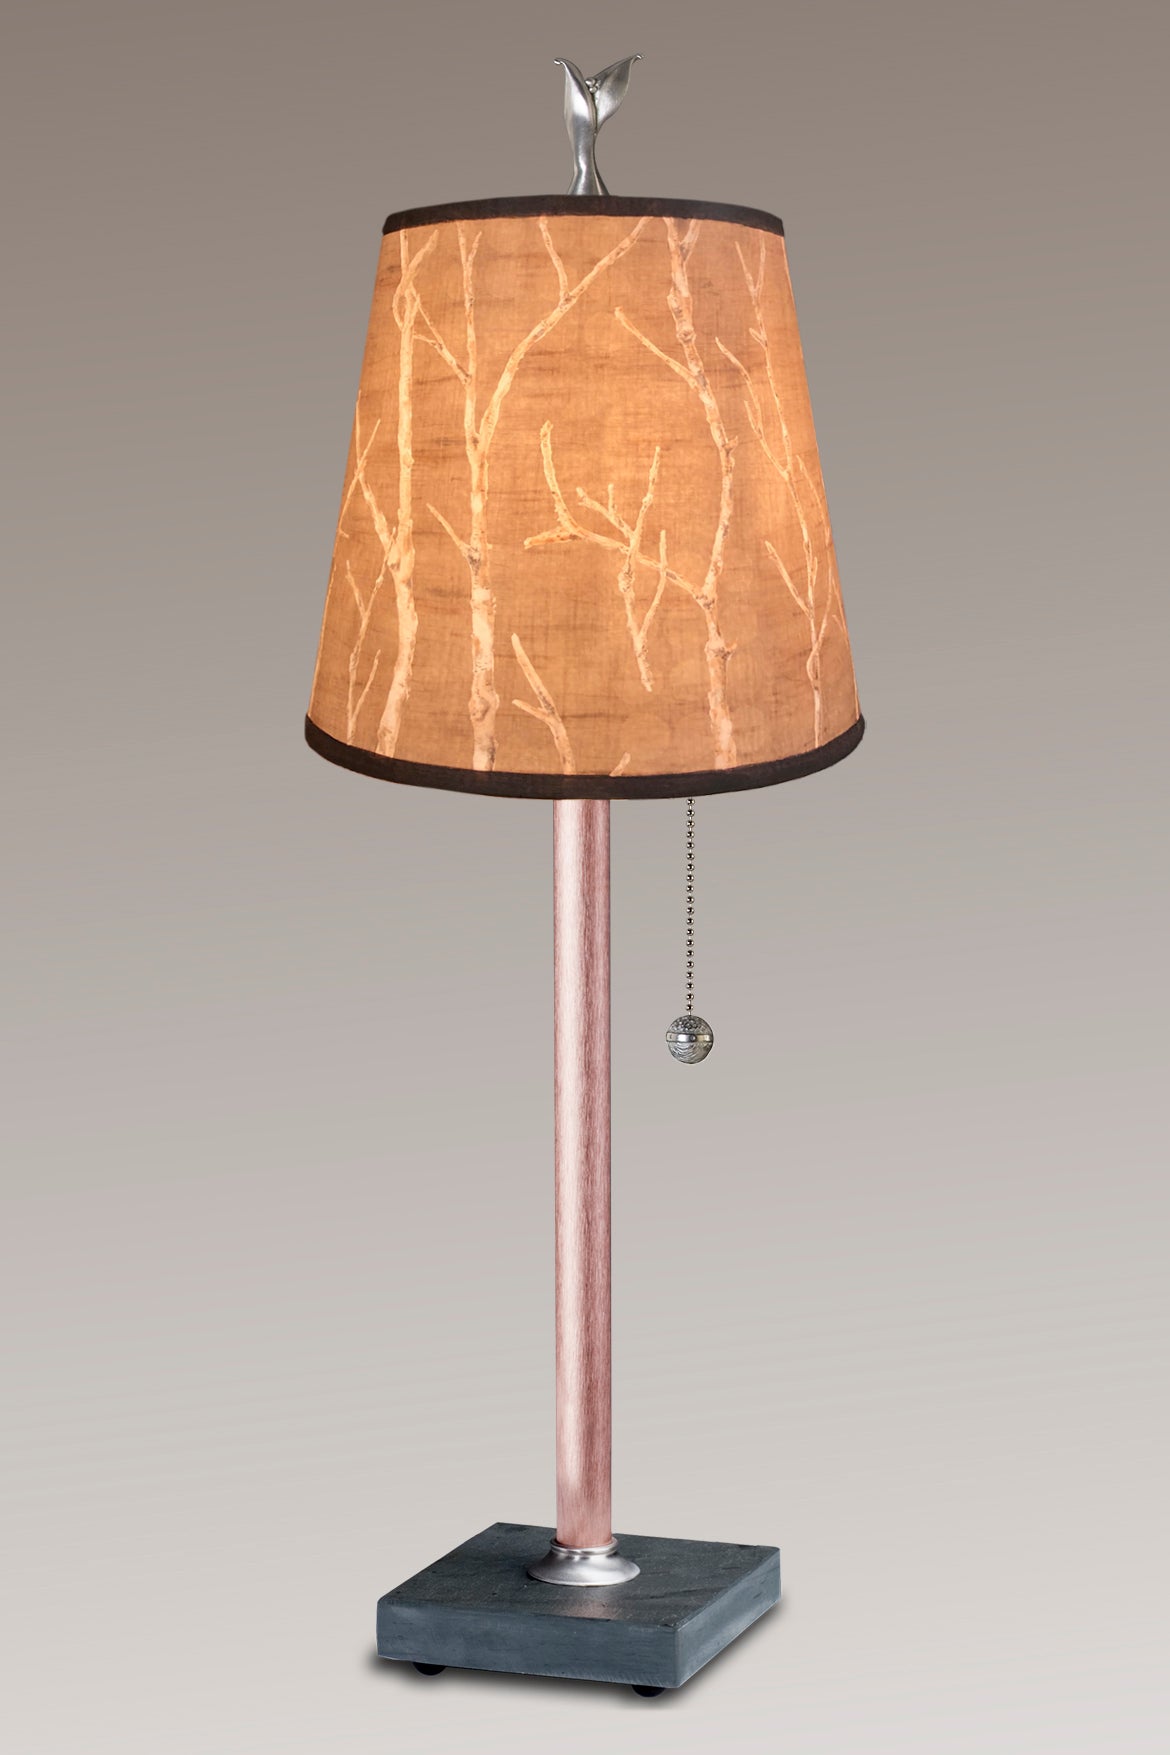 Janna Ugone & Co Table Lamps Copper Table Lamp with Small Drum in Twigs